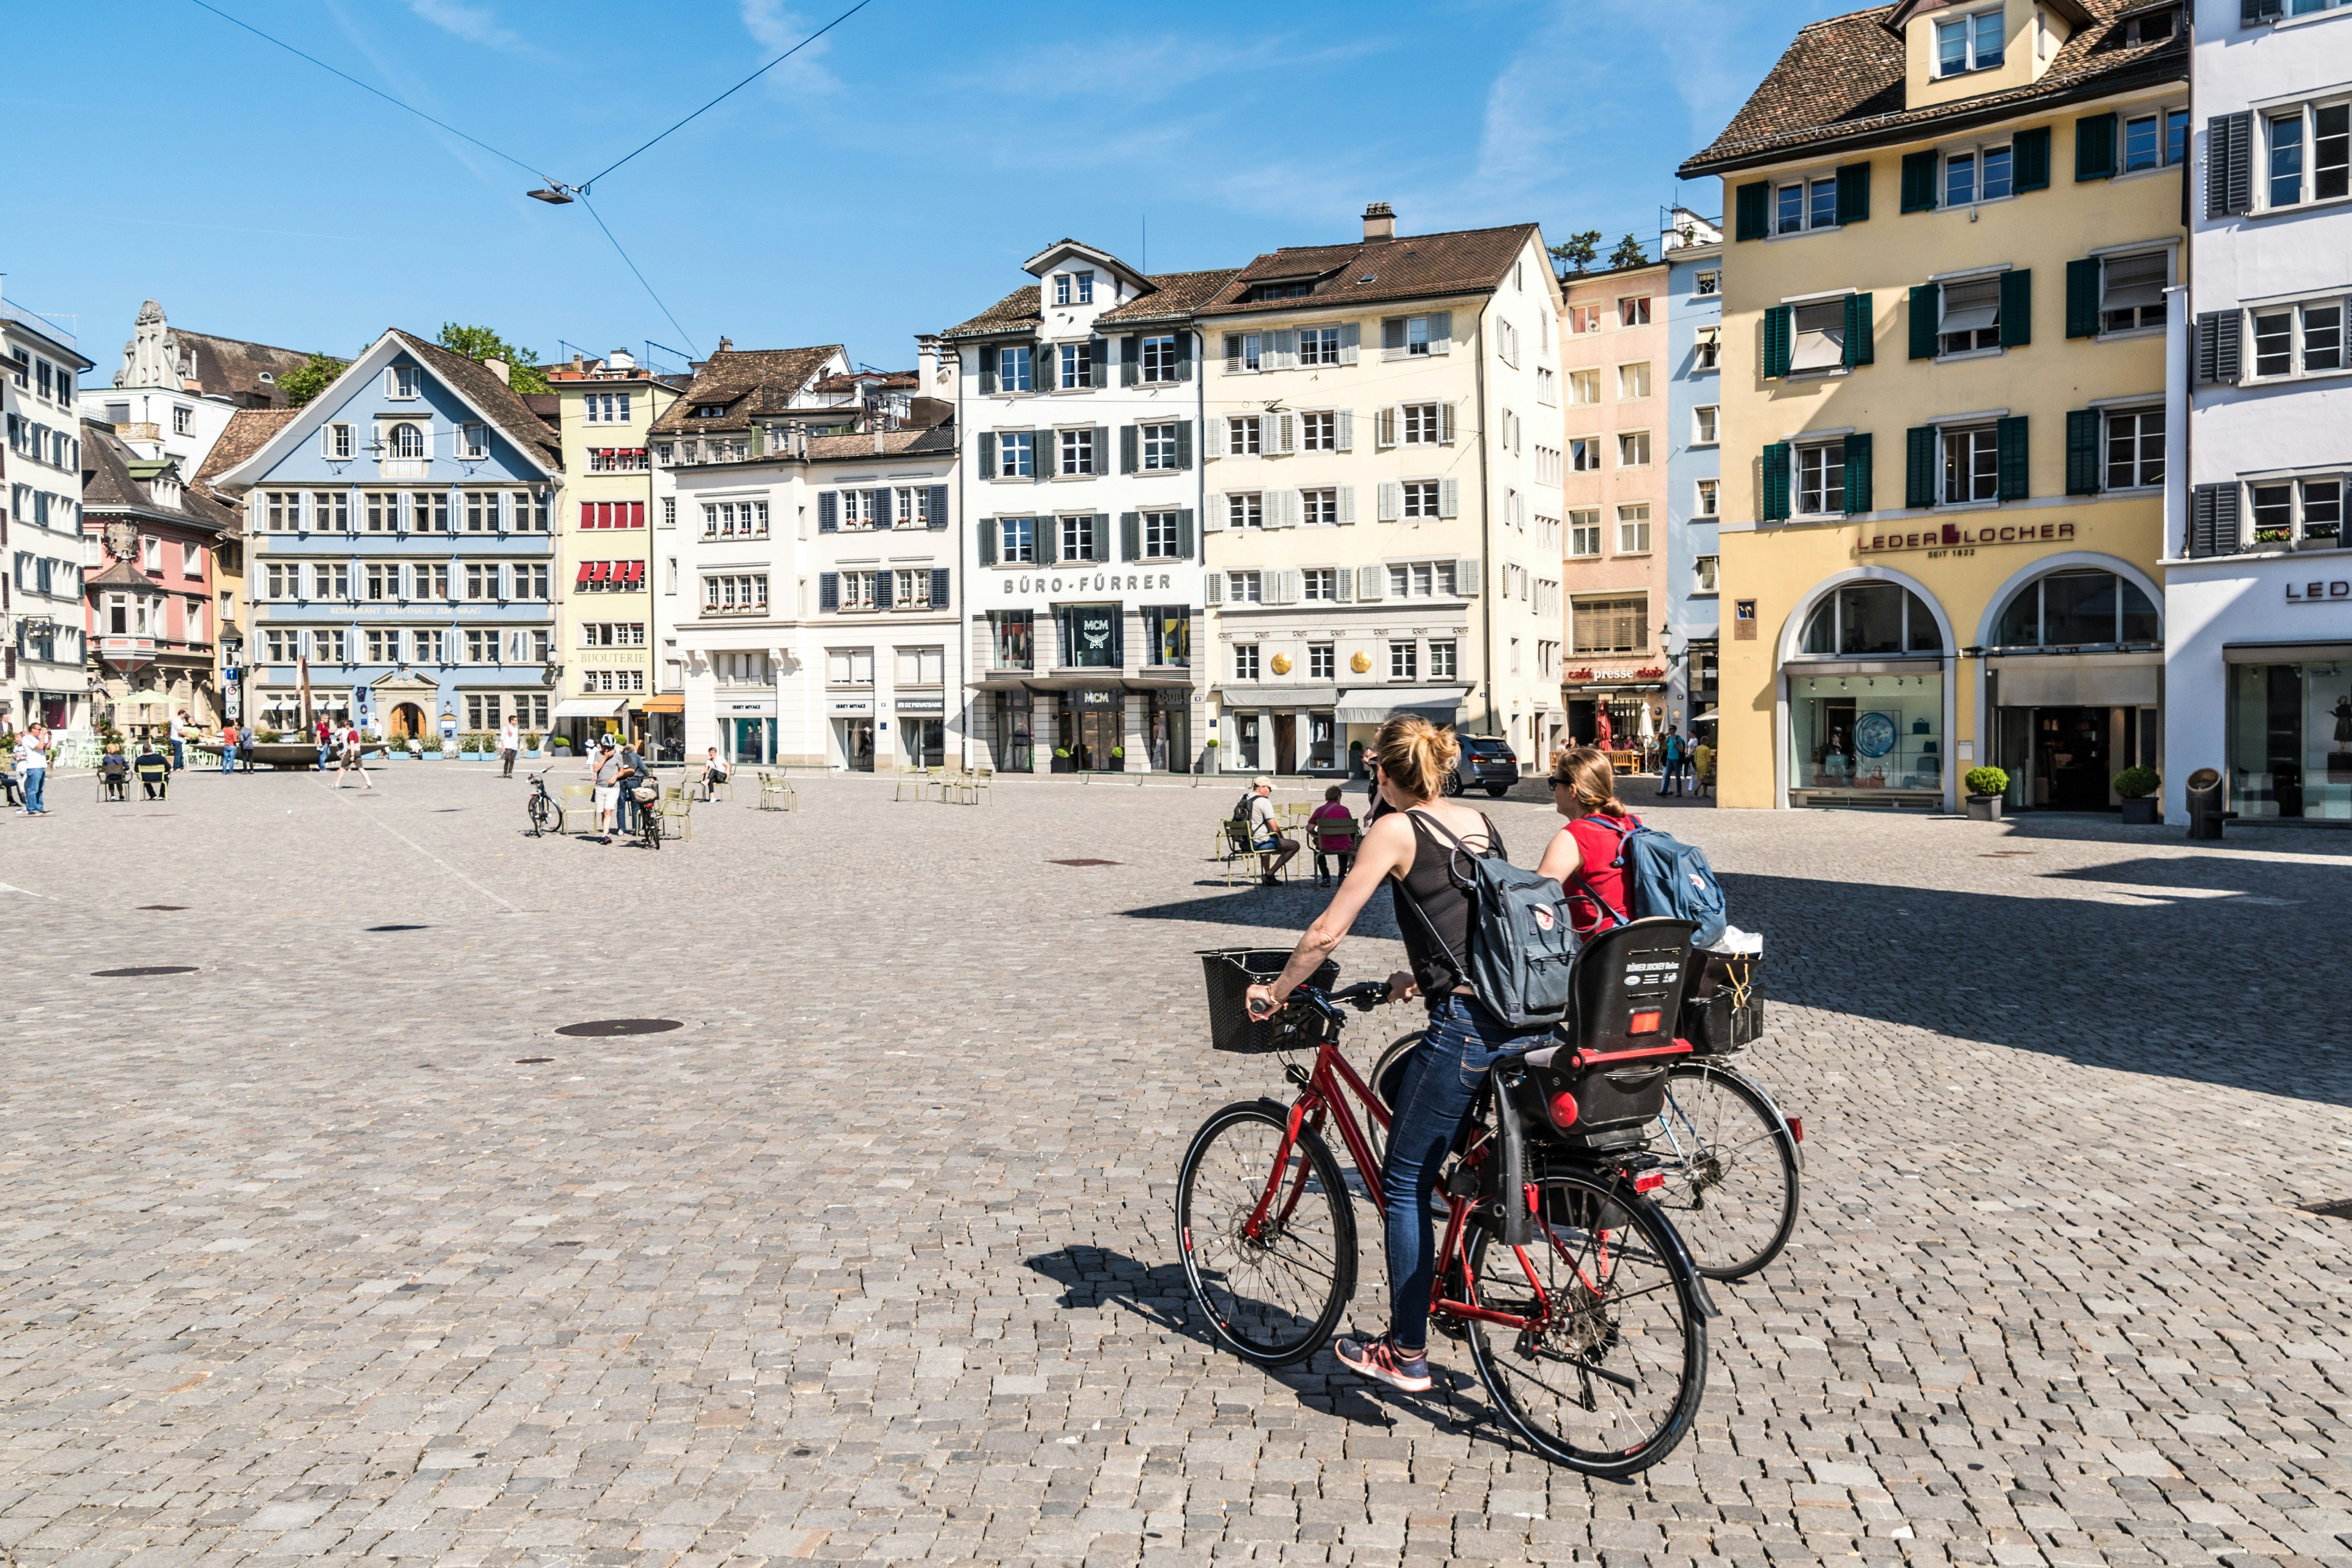 Two young ladies ride bicycles through a town square in Zurich, the capital of Switzerland. Other people walk along the paths passing shops.